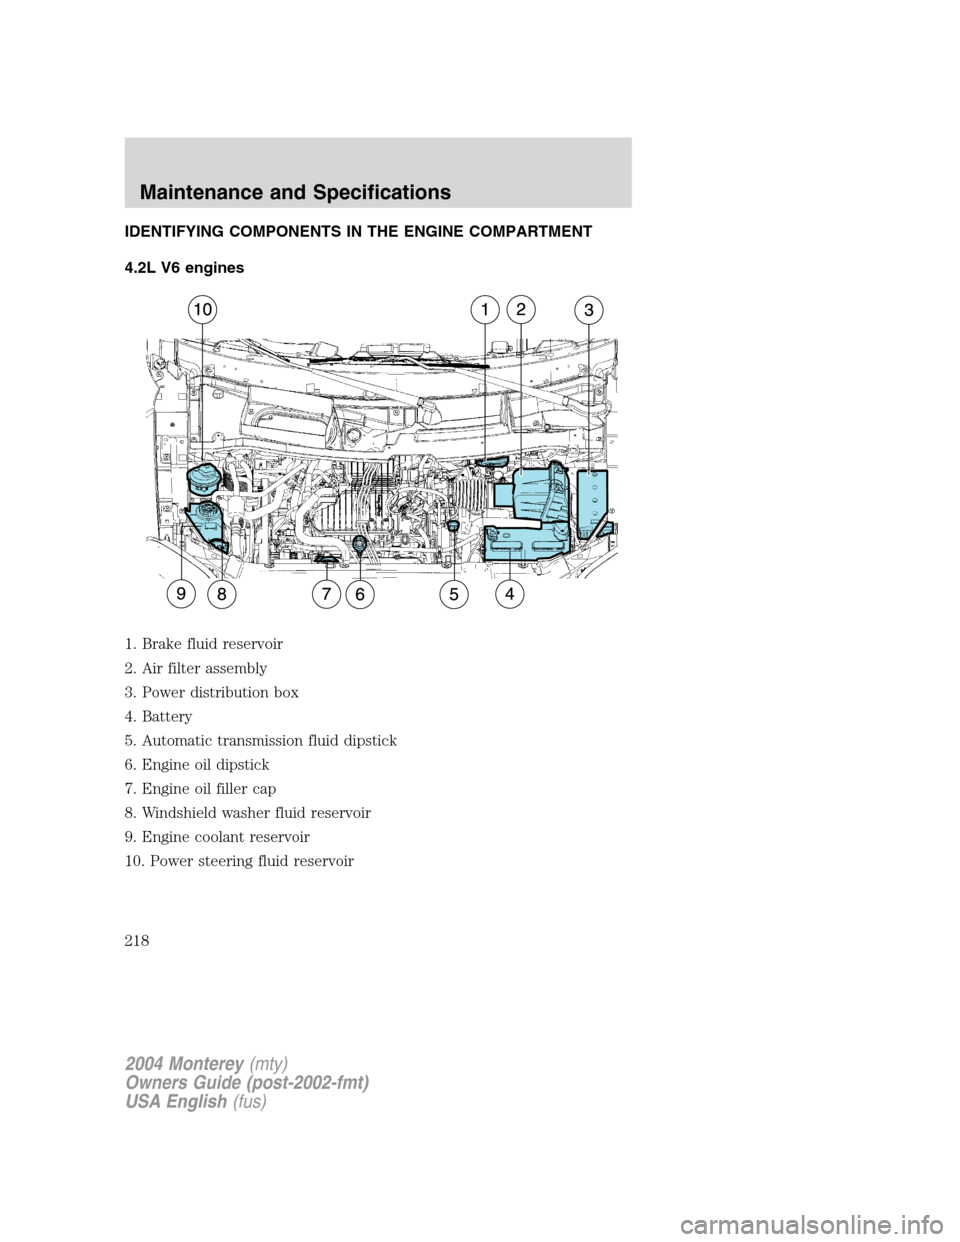 Mercury Monterey 2004  Owners Manuals IDENTIFYING COMPONENTS IN THE ENGINE COMPARTMENT
4.2L V6 engines
1. Brake fluid reservoir
2. Air filter assembly
3. Power distribution box
4. Battery
5. Automatic transmission fluid dipstick
6. Engine